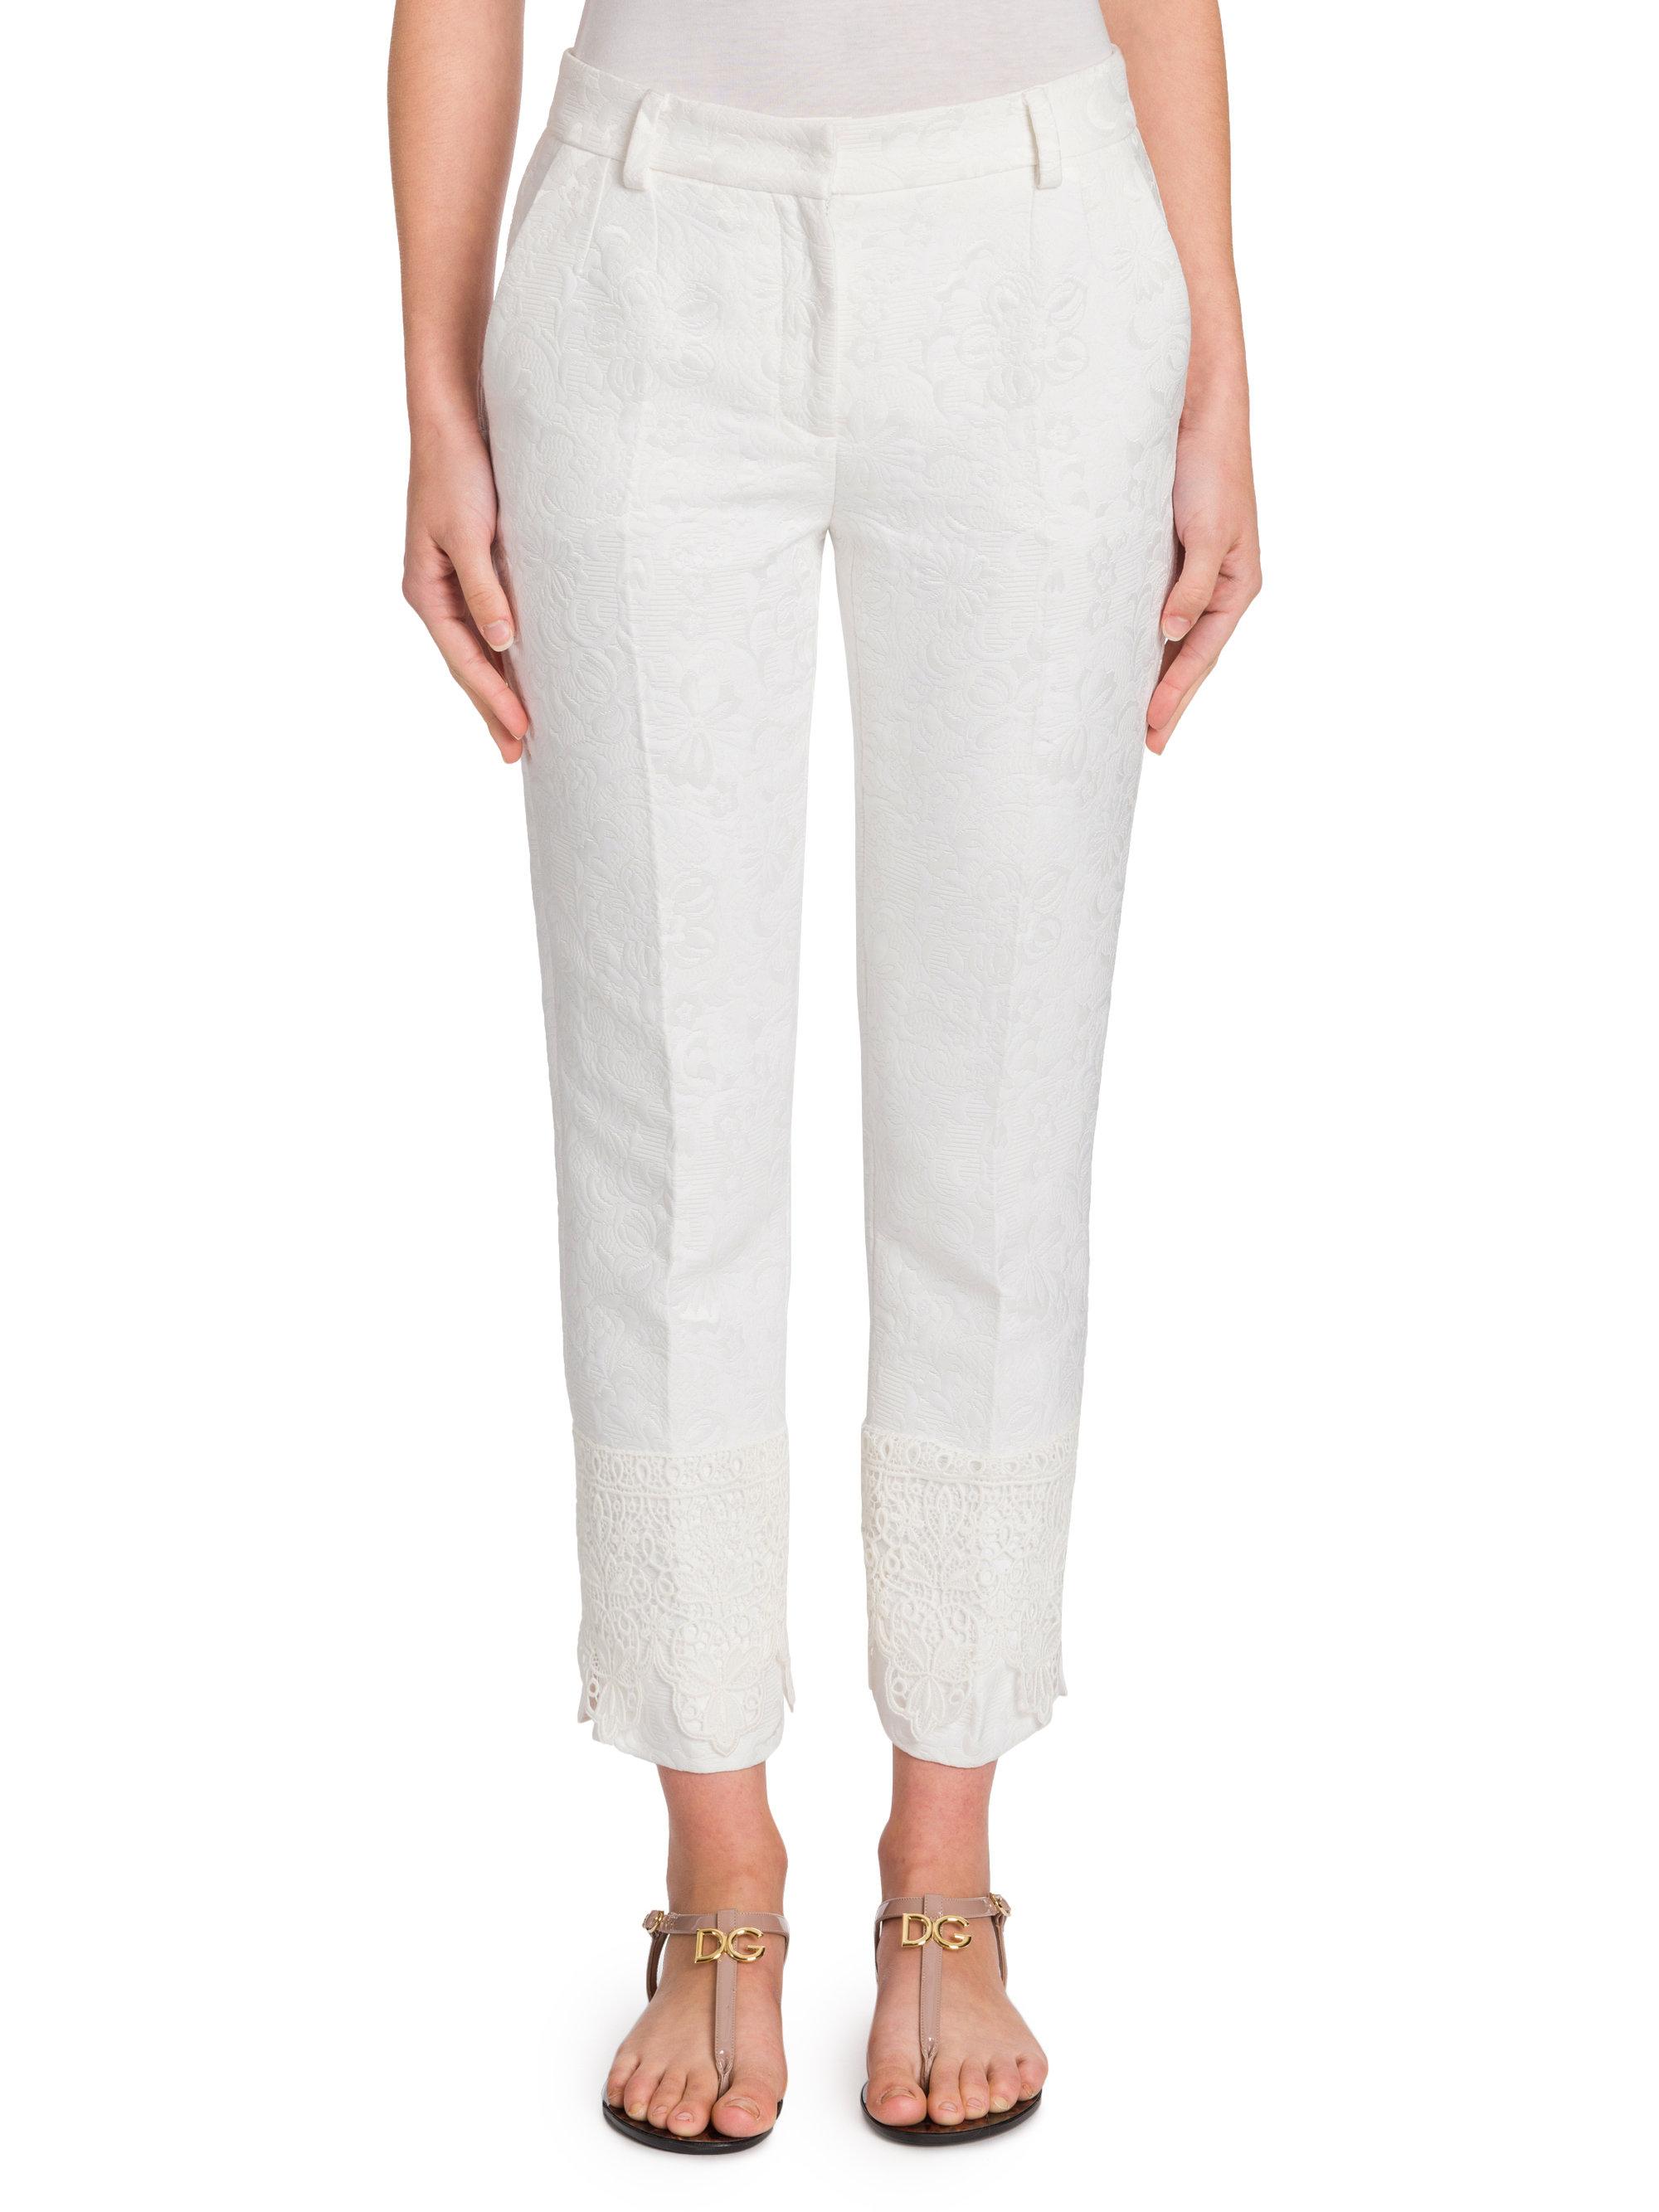 Dolce & Gabbana Brocade Cropped Pants With Lace Hem in White - Lyst